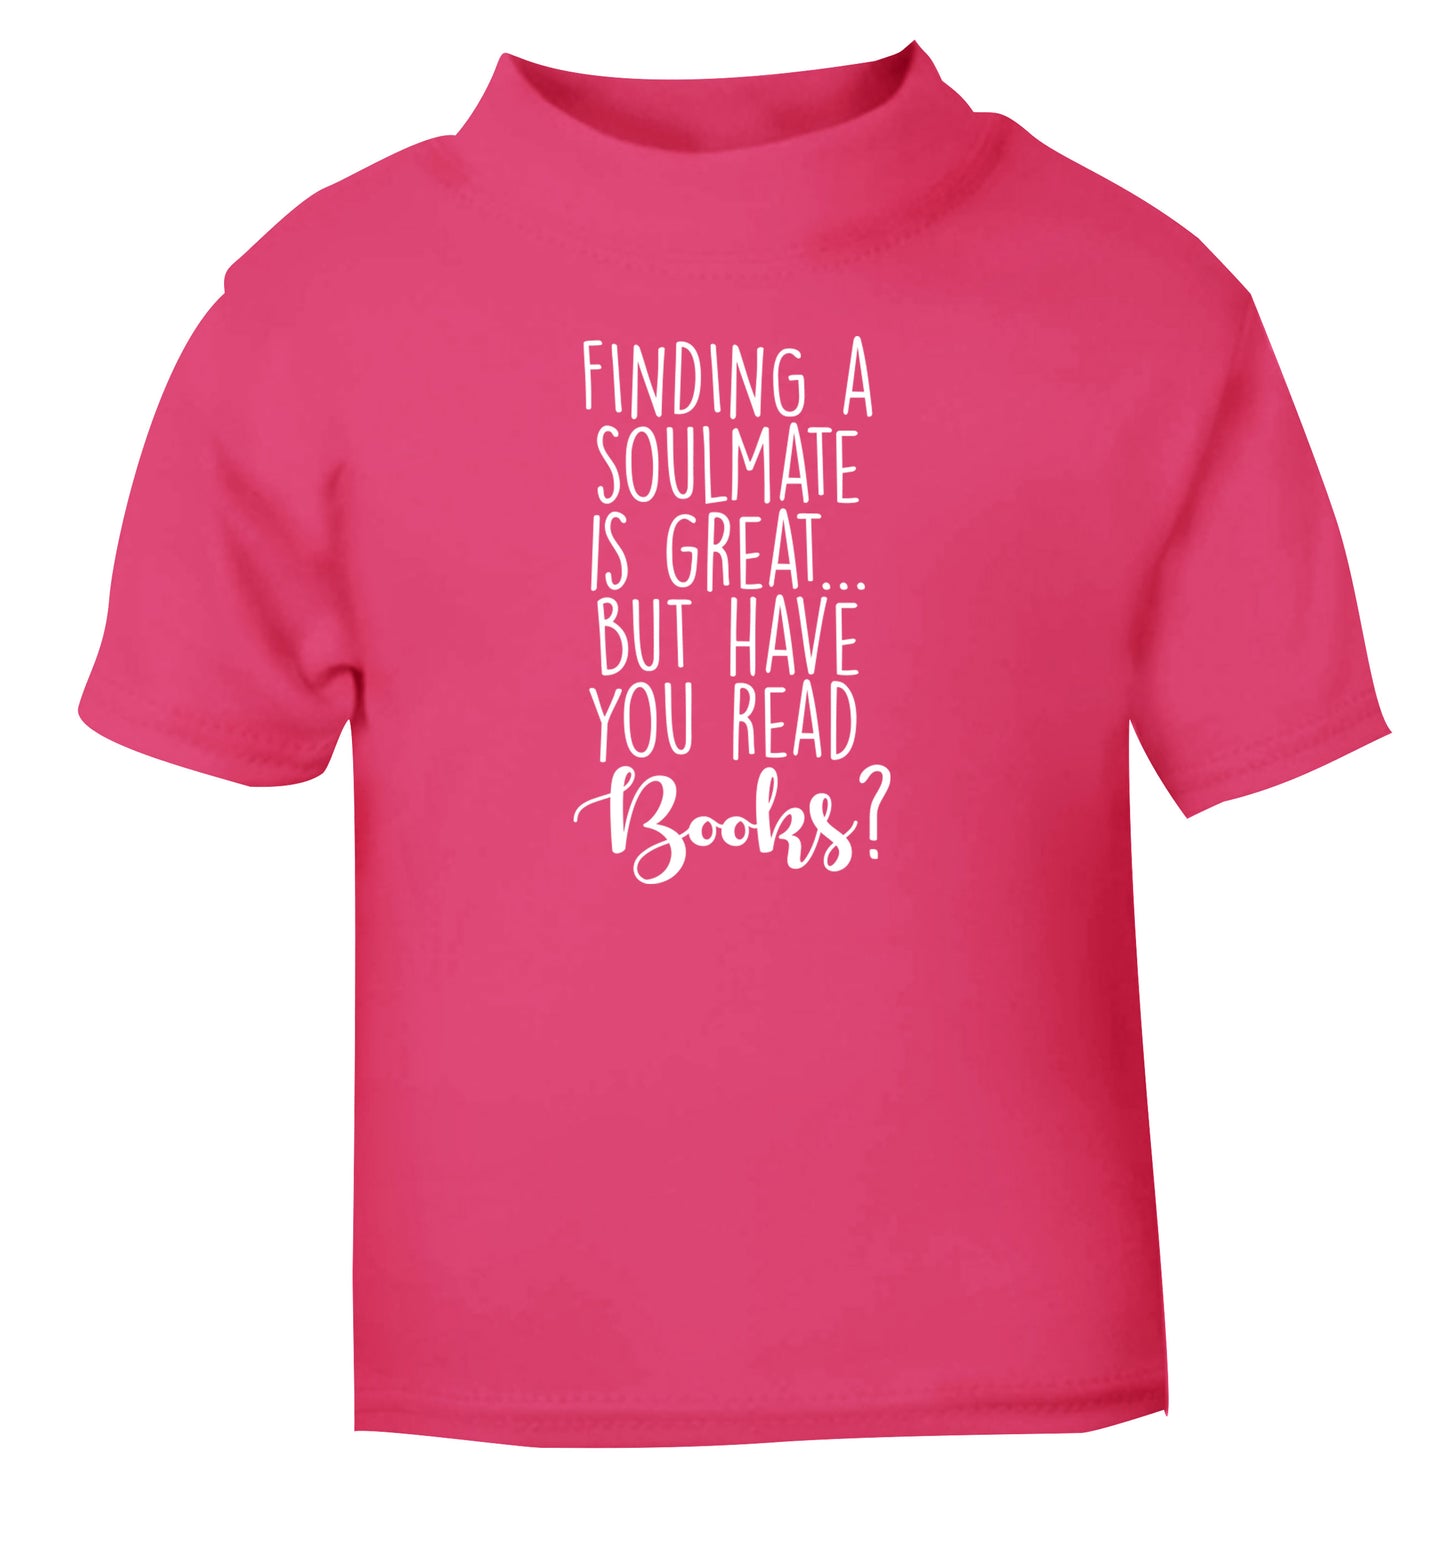 Finding a soulmate is great but have you read books? pink Baby Toddler Tshirt 2 Years